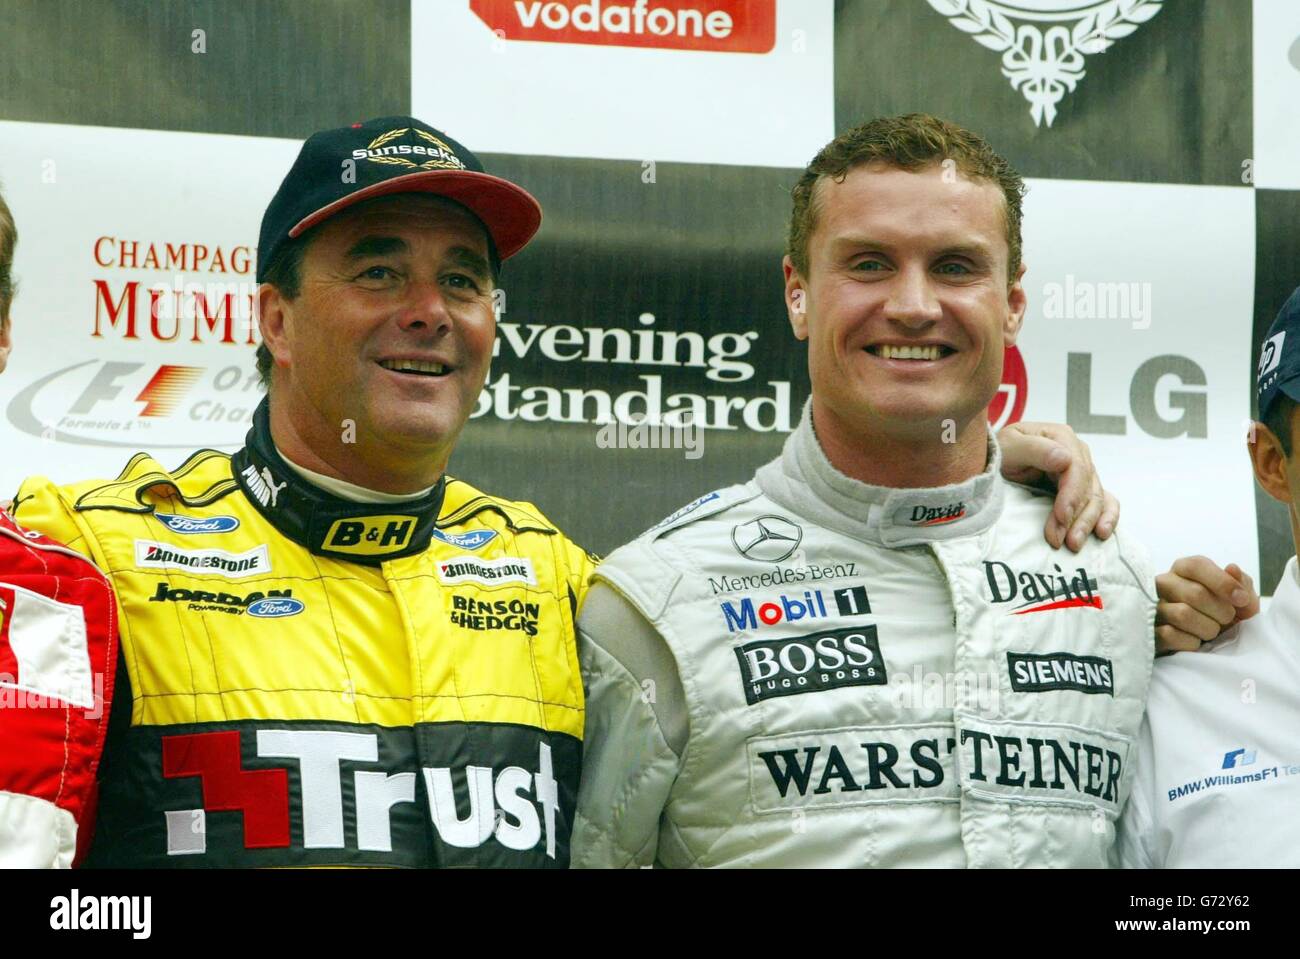 Former F1 World Champion Nigel Mansell and current F1 driver David Coulthard  stand on the podium in London's Regent Street, before a race around a  section of the West End. Competitors from